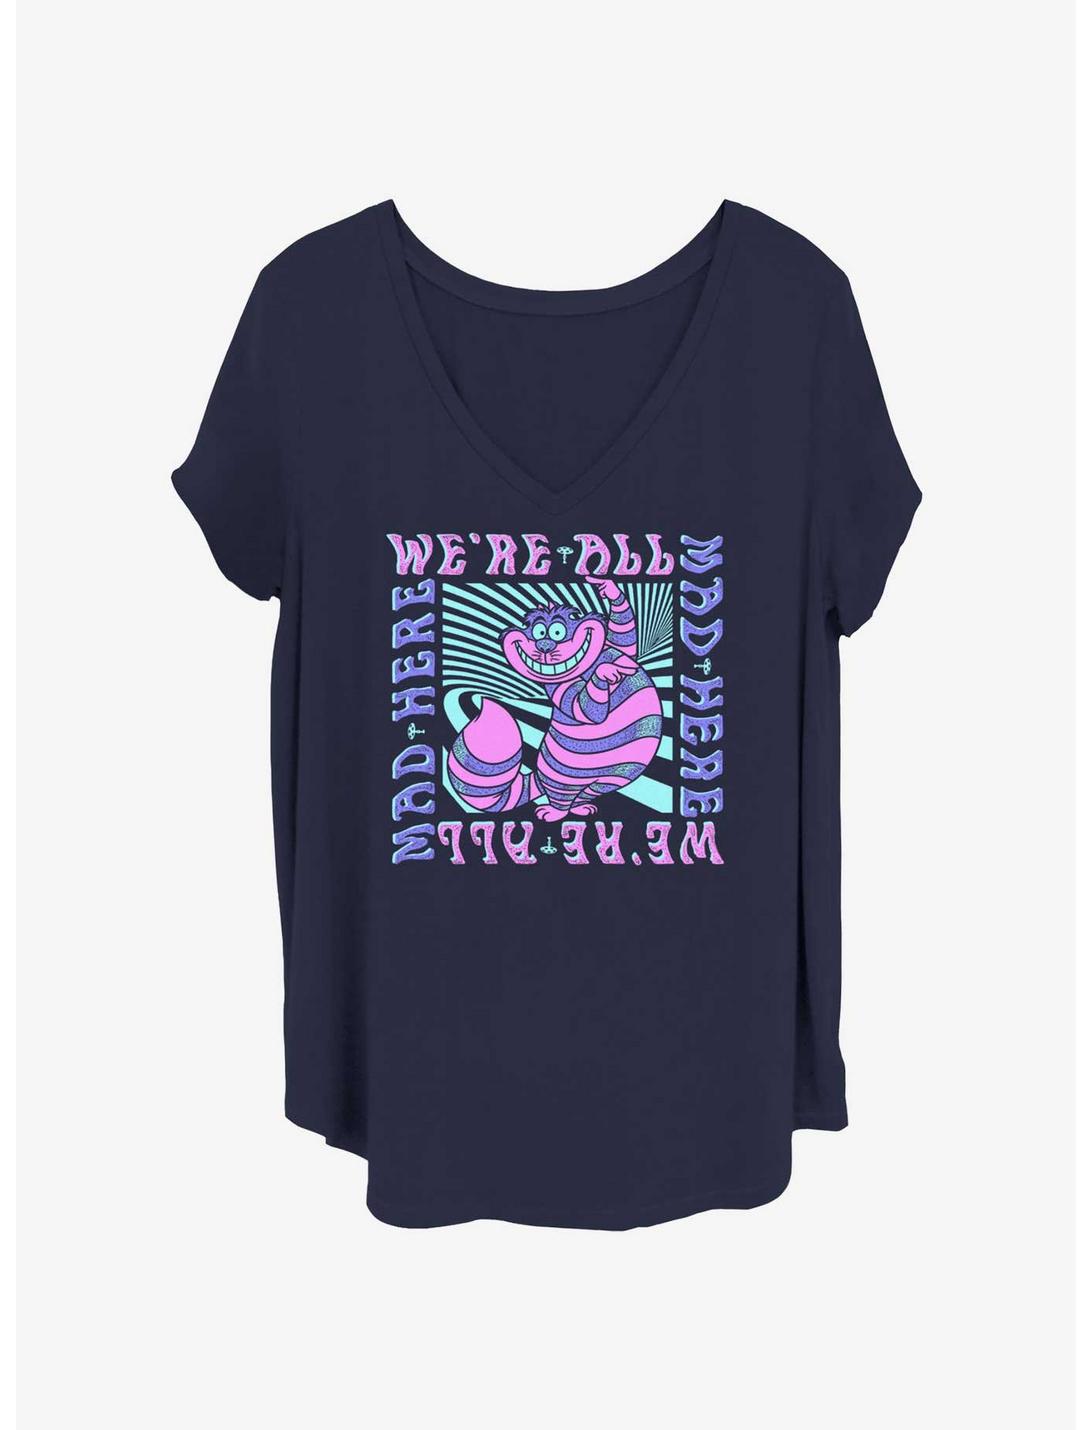 Disney Alice In Wonderland Cheshire We're All Mad Here Girls T-Shirt Plus Size, NAVY, hi-res